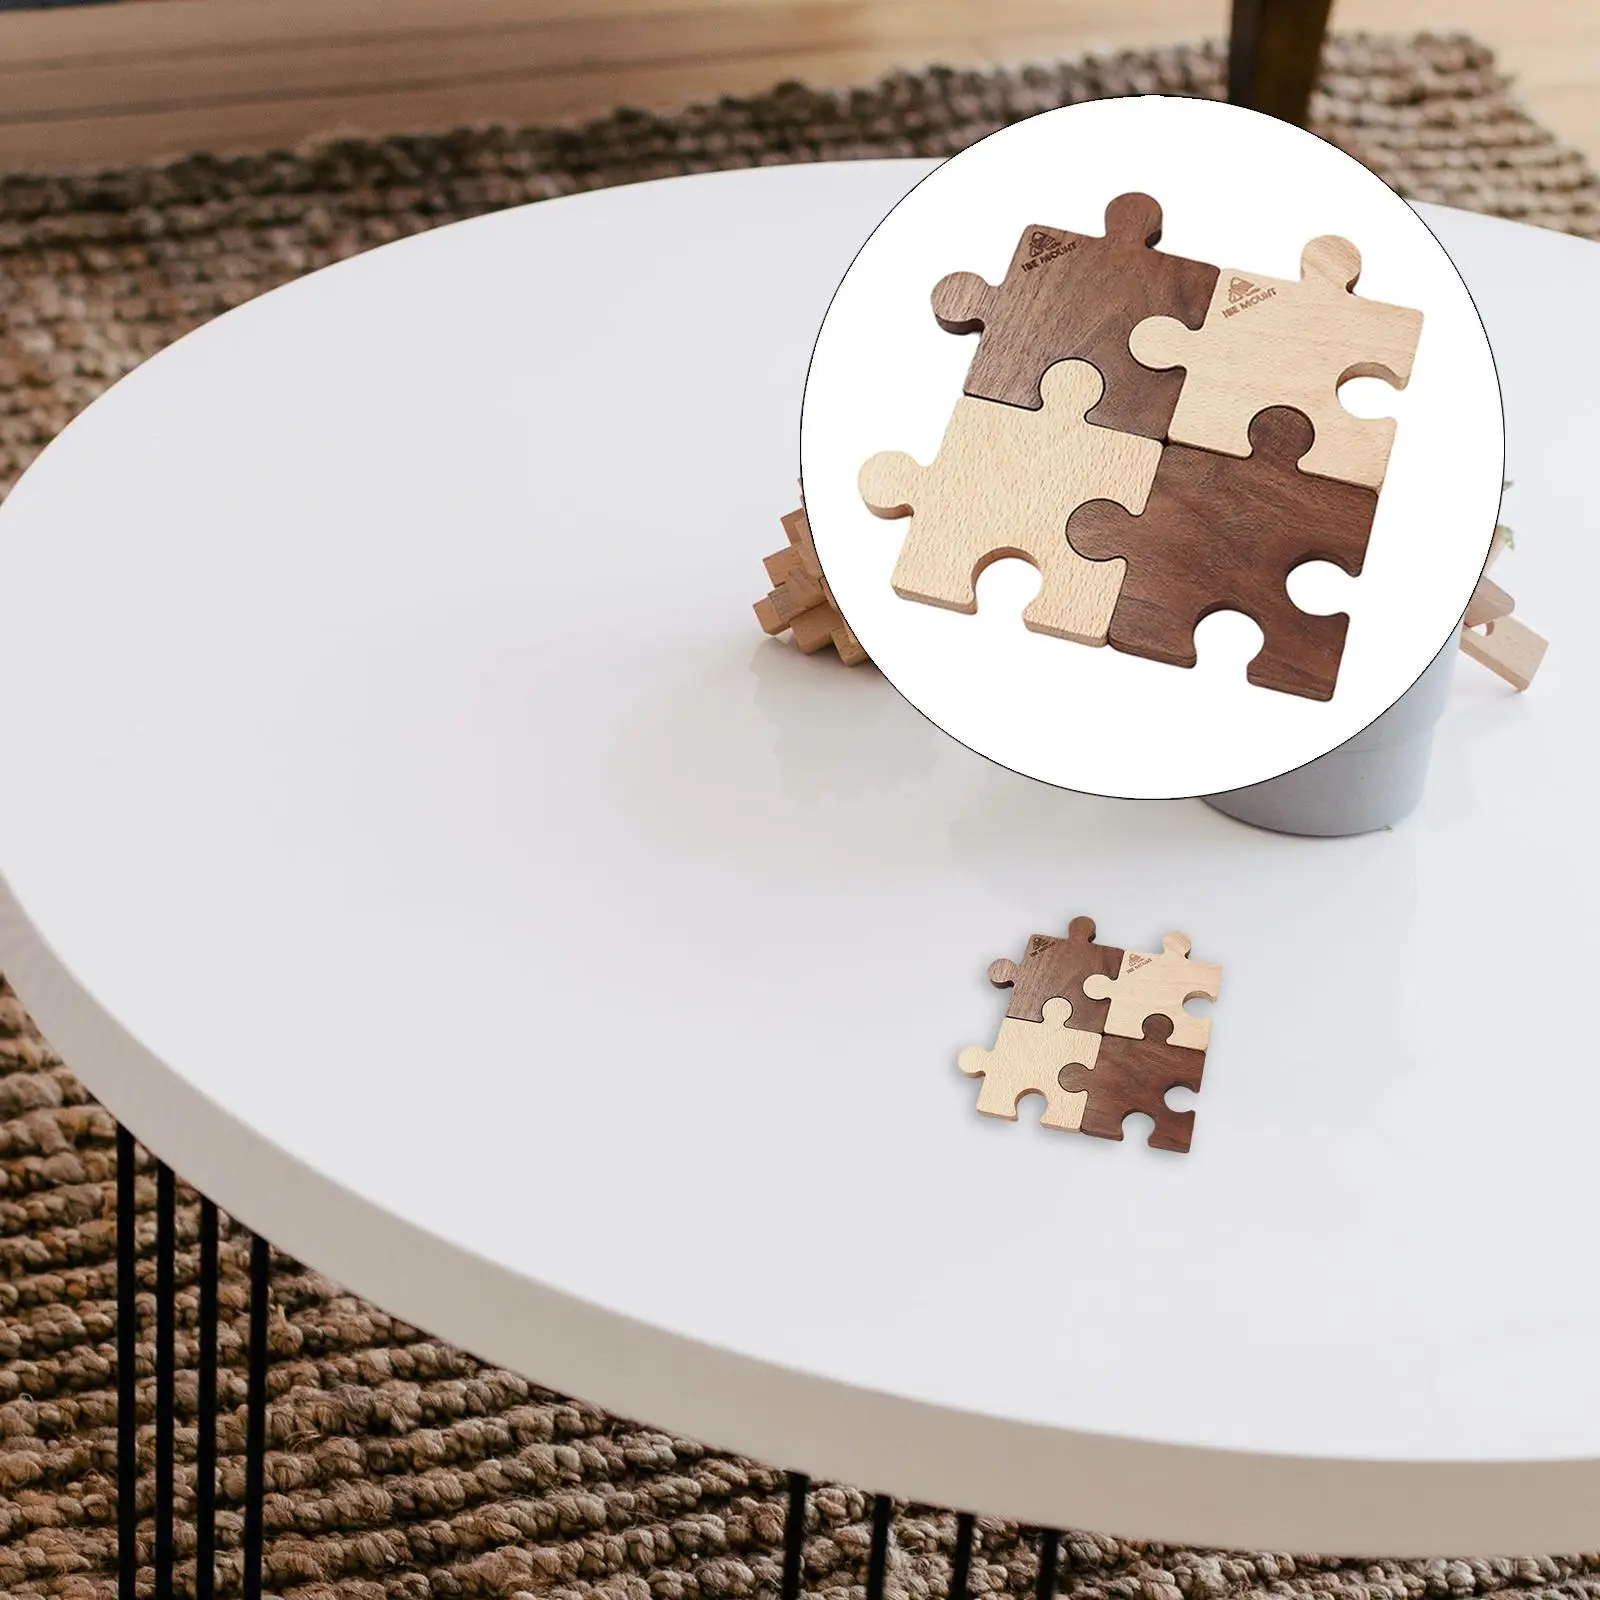 4x Wooden Coasters Jigsaw Puzzle Design Creative Heat Resistant Decoration Housewarming Gifts Coffee Cup Mat for Office Tabletop